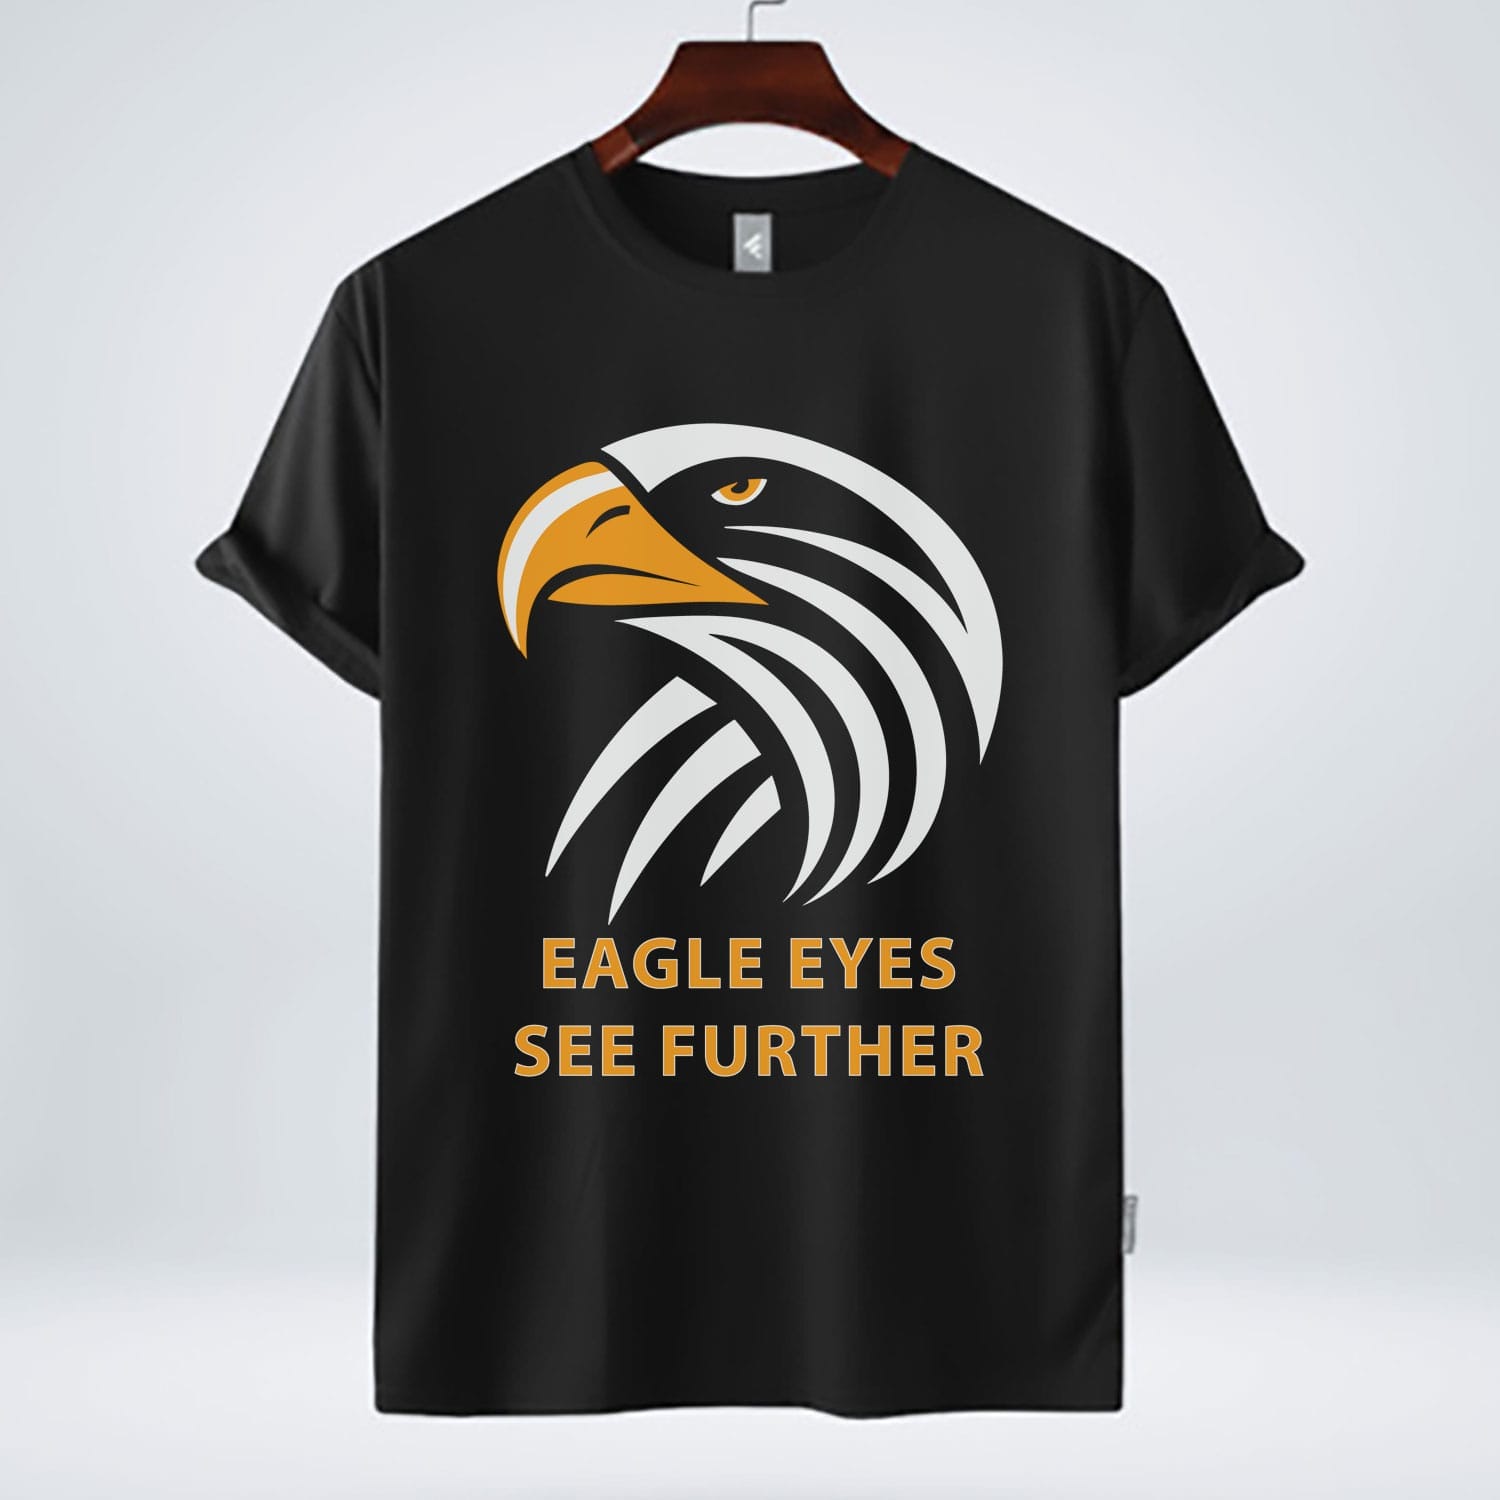 Eat;e Eyes See Further T shirt design